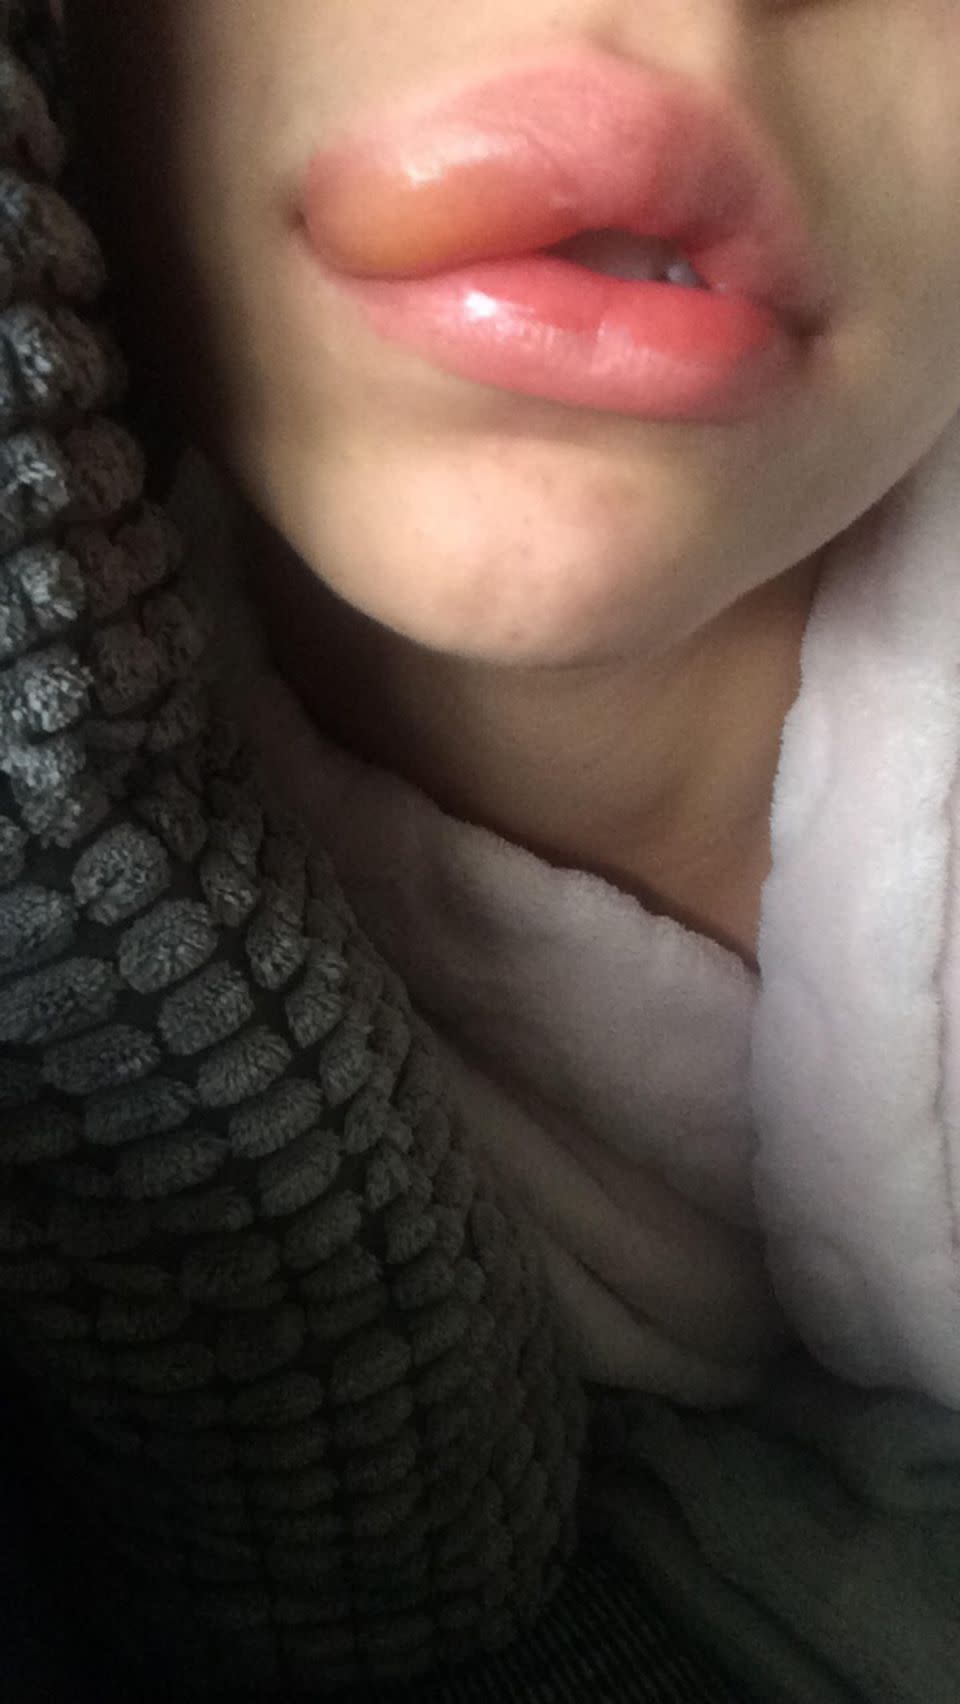 Larissa Reynolds was left with terrible swelling after using a counterfeit lip gloss. Source: Caters